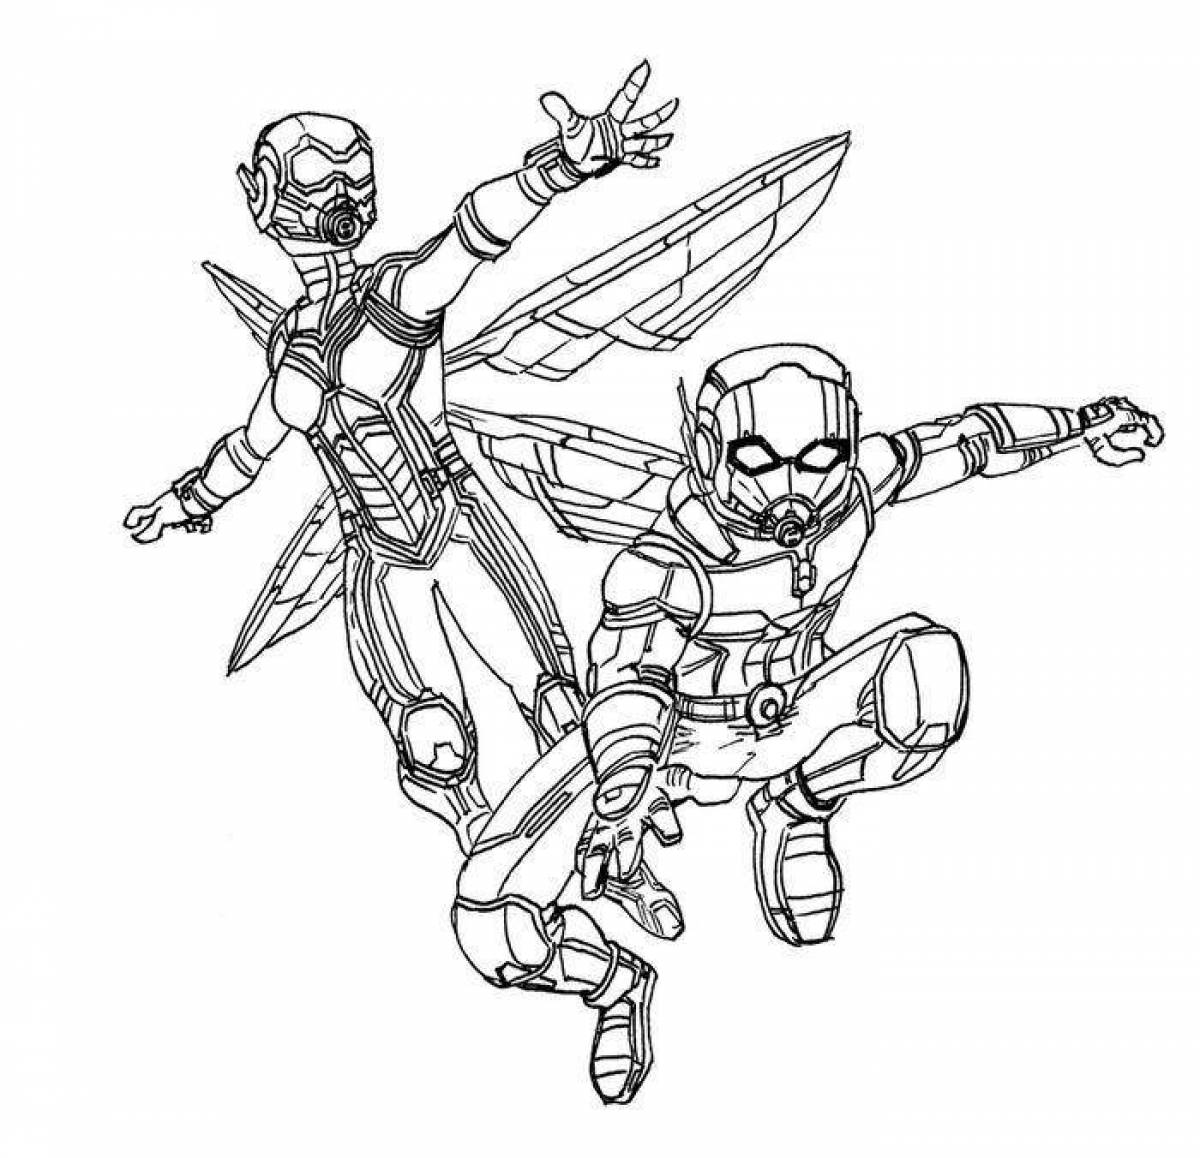 Ant-Man coloring page